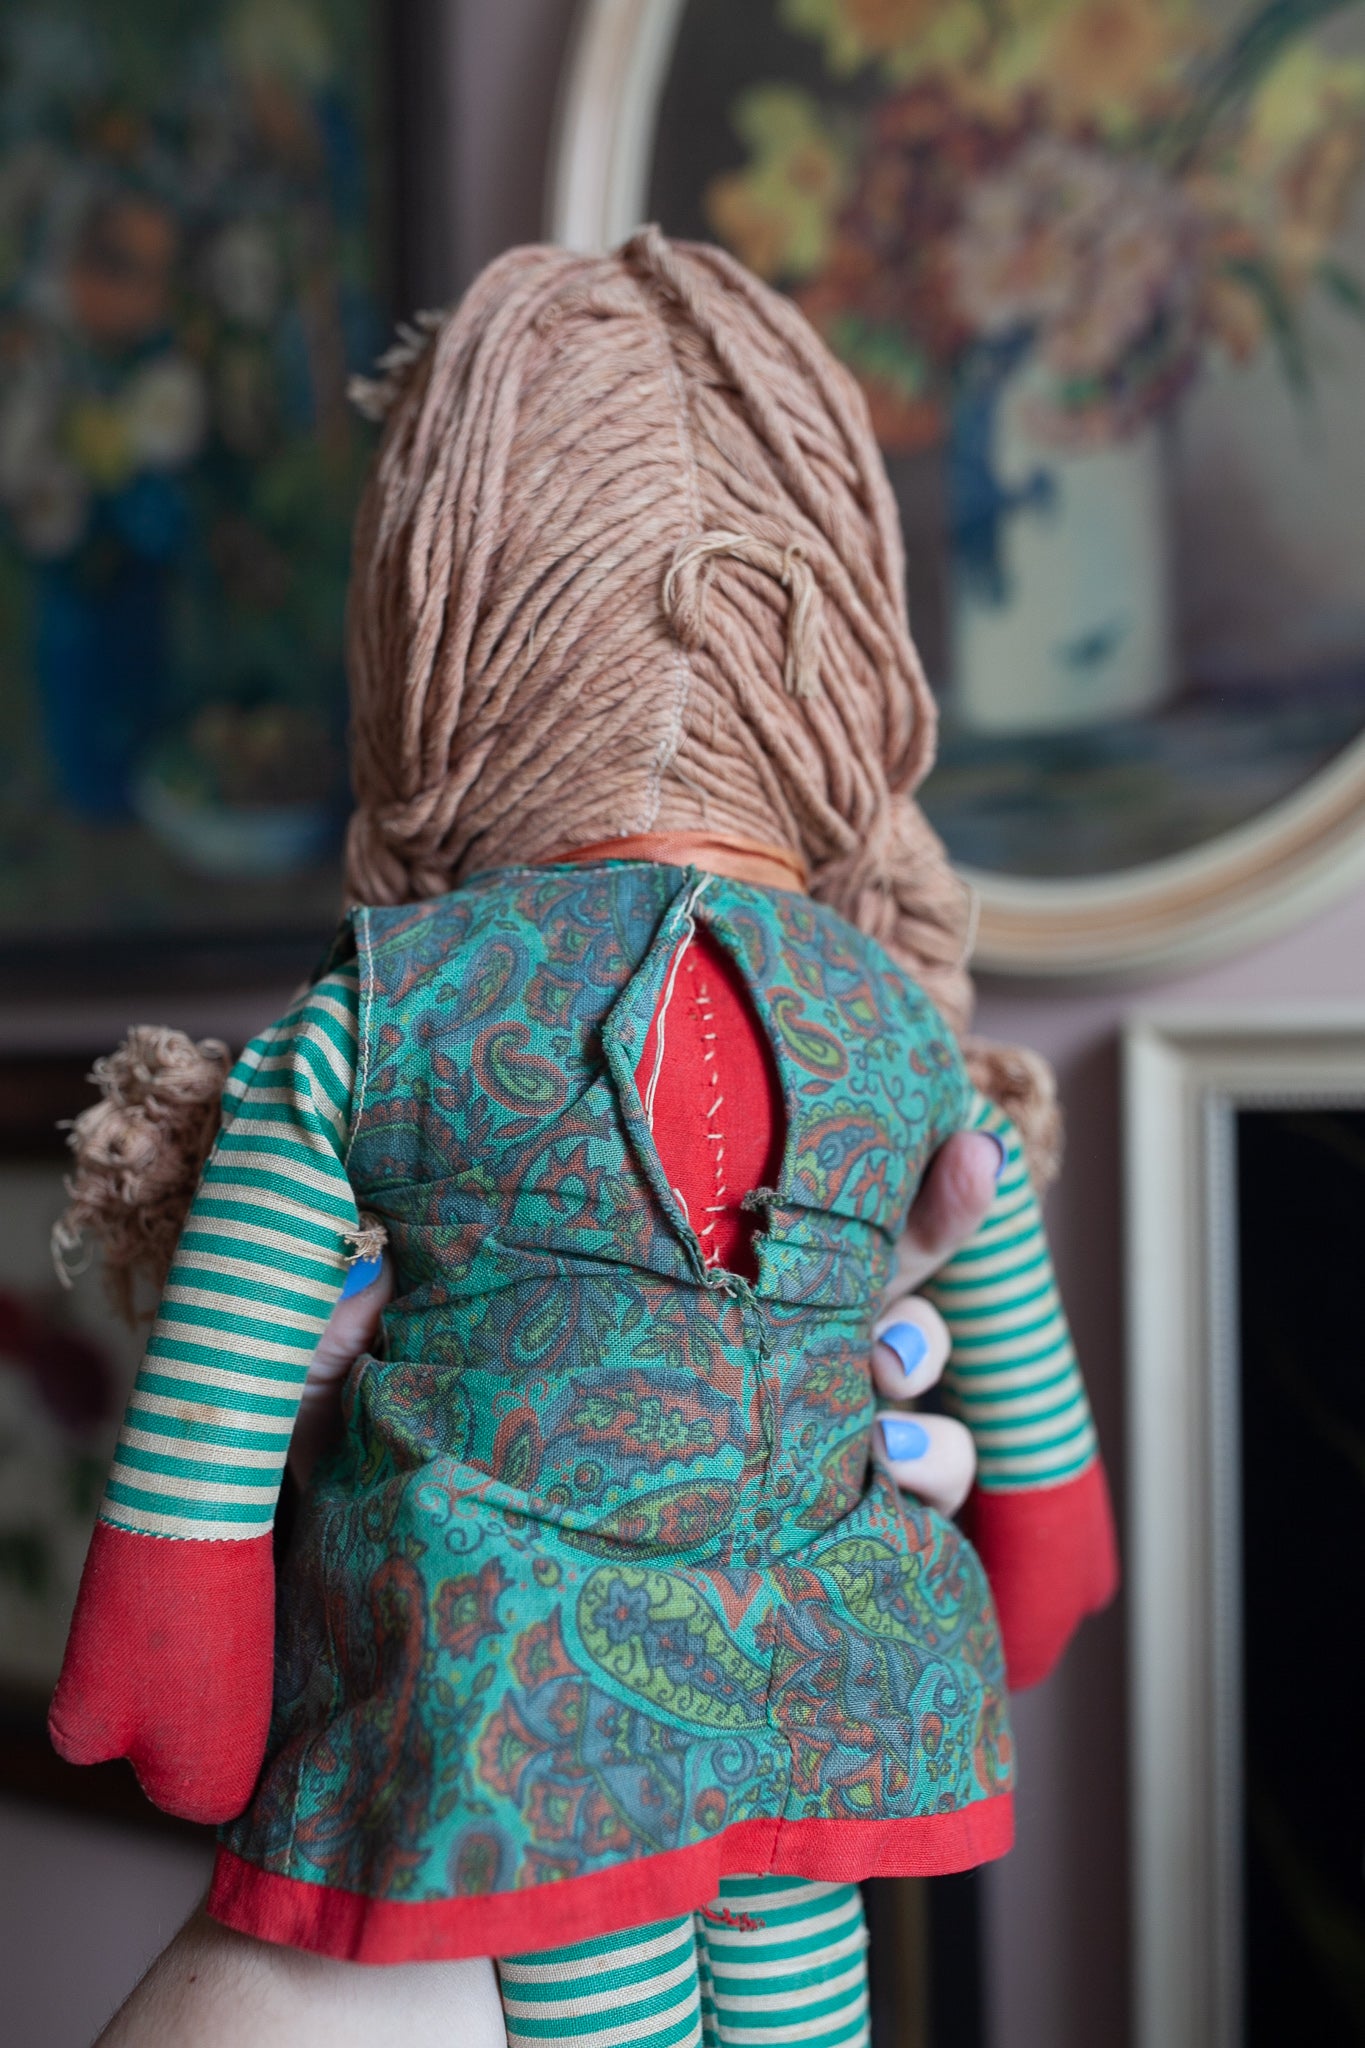 Vintage Doll - Rag Doll With Mask Face -Doll